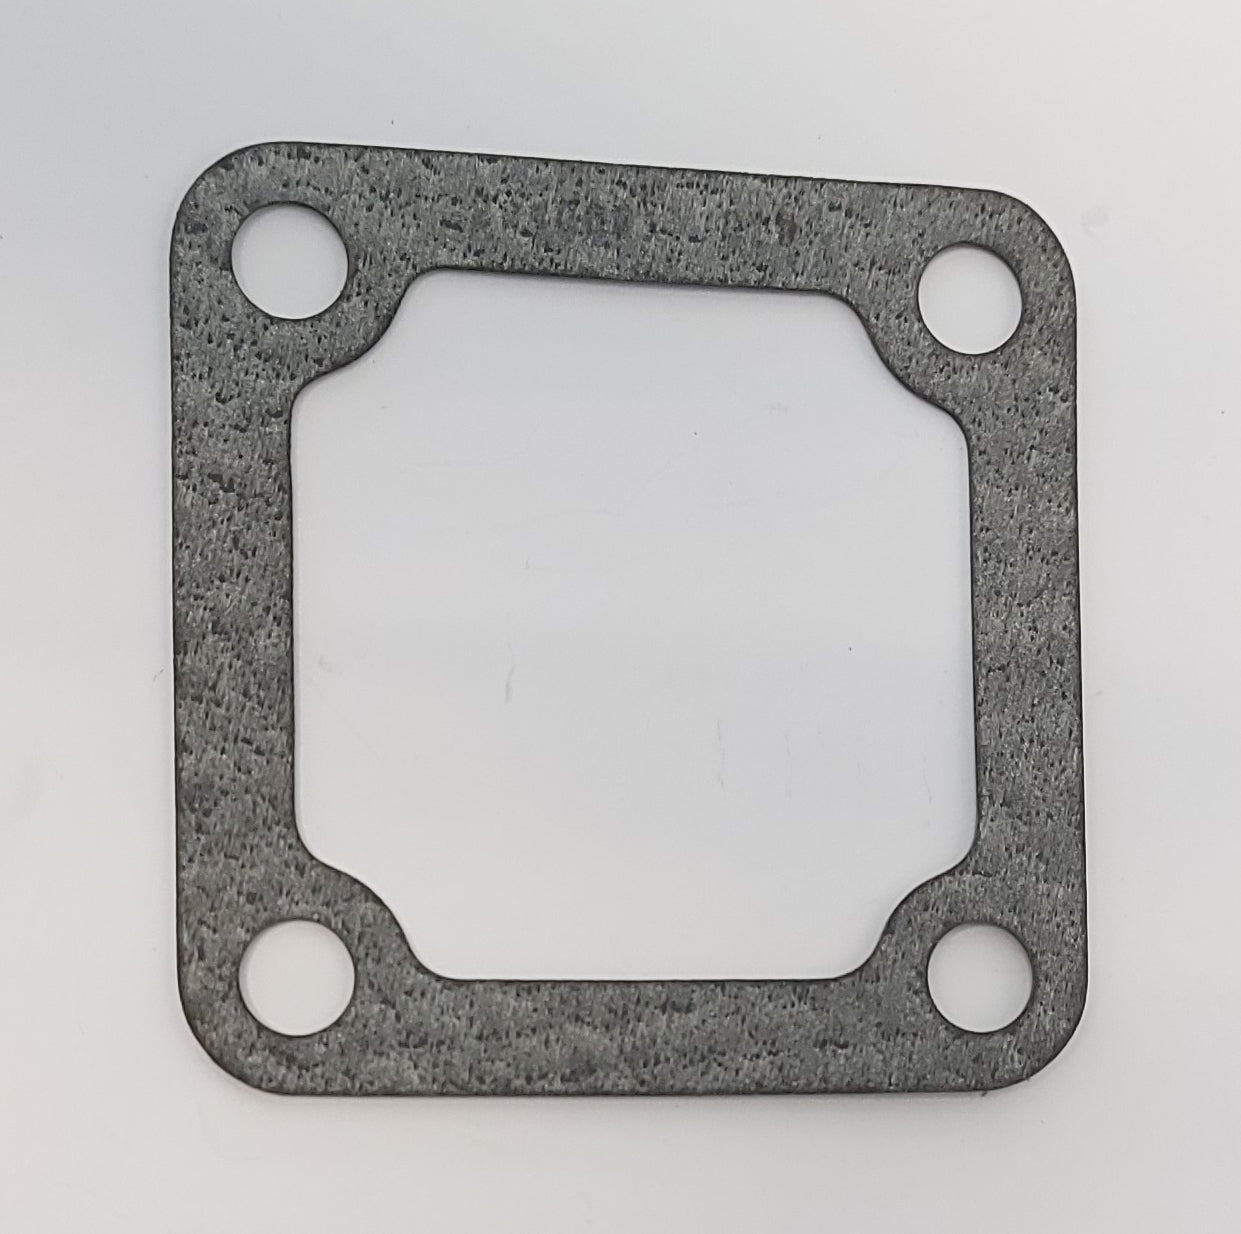 (NEW OLD STOCK) 3040057 - Cummins Water Transfer Cover Gasket